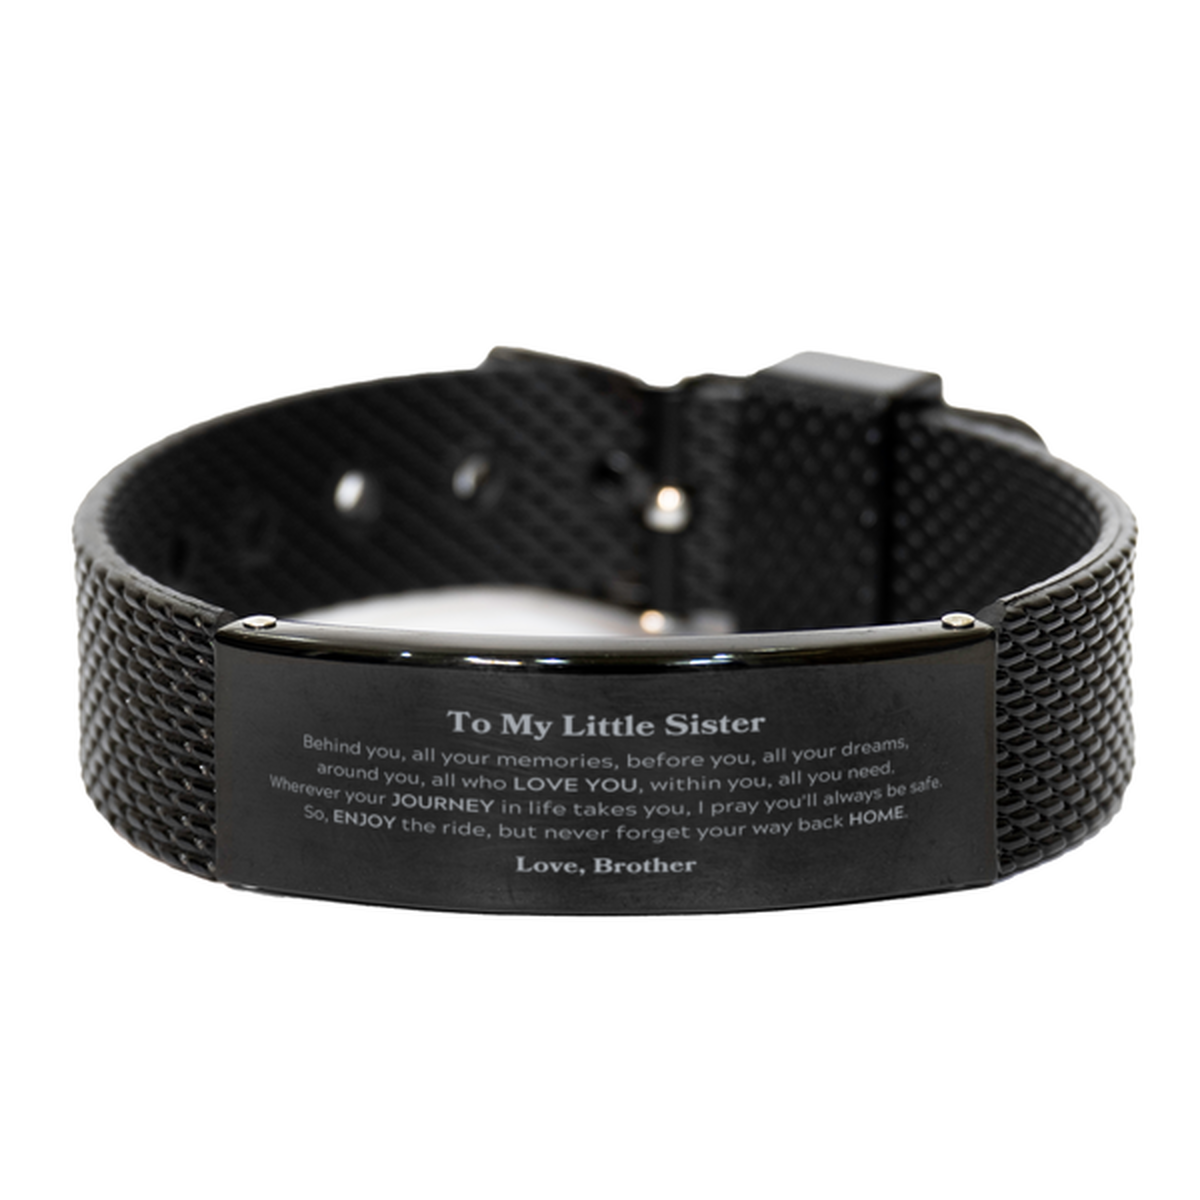 To My Little Sister Graduation Gifts from Brother, Little Sister Black Shark Mesh Bracelet Christmas Birthday Gifts for Little Sister Behind you, all your memories, before you, all your dreams. Love, Brother